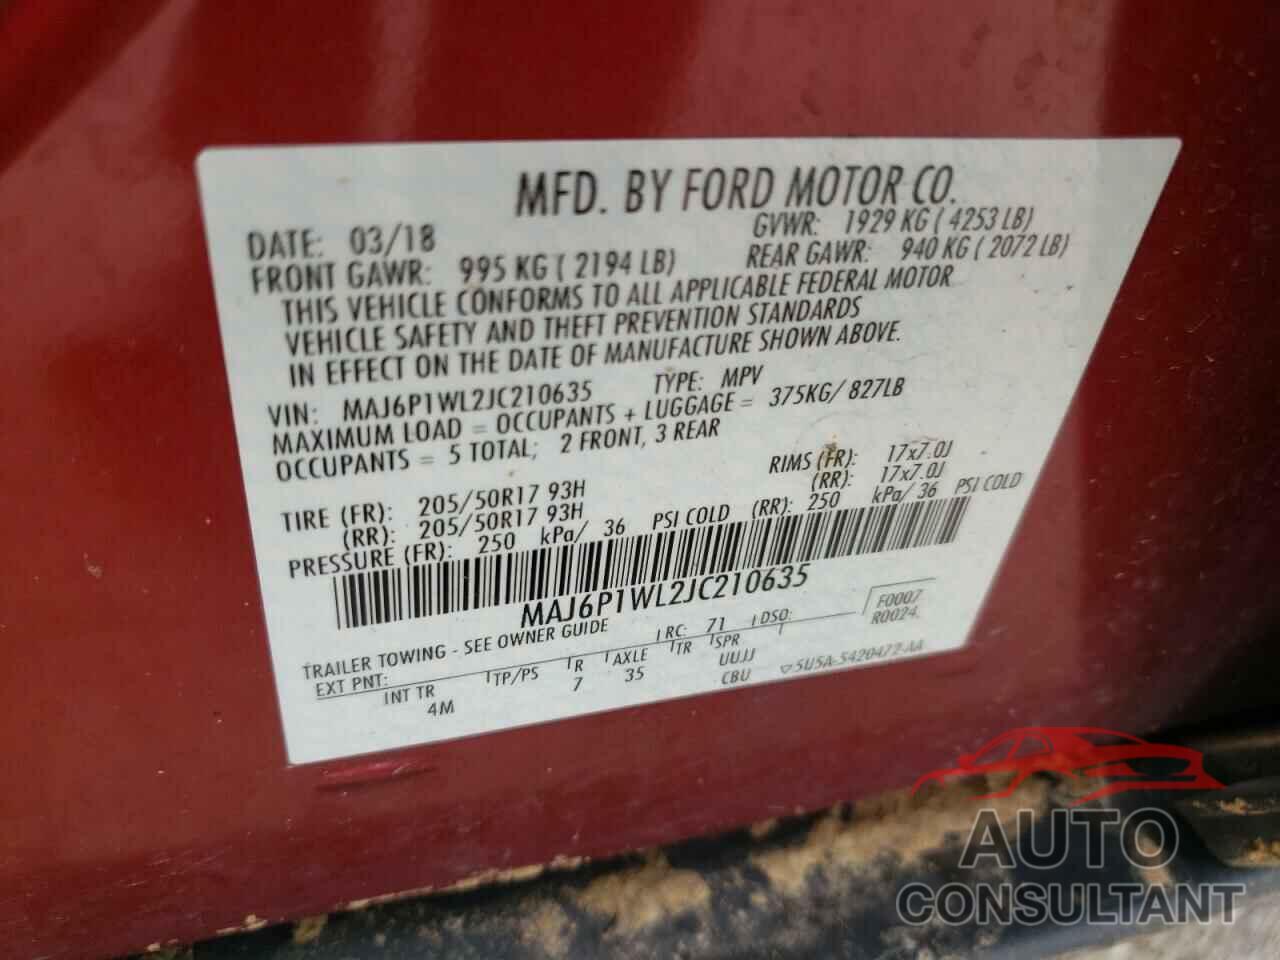 FORD ALL OTHER 2018 - MAJ6P1WL2JC210635